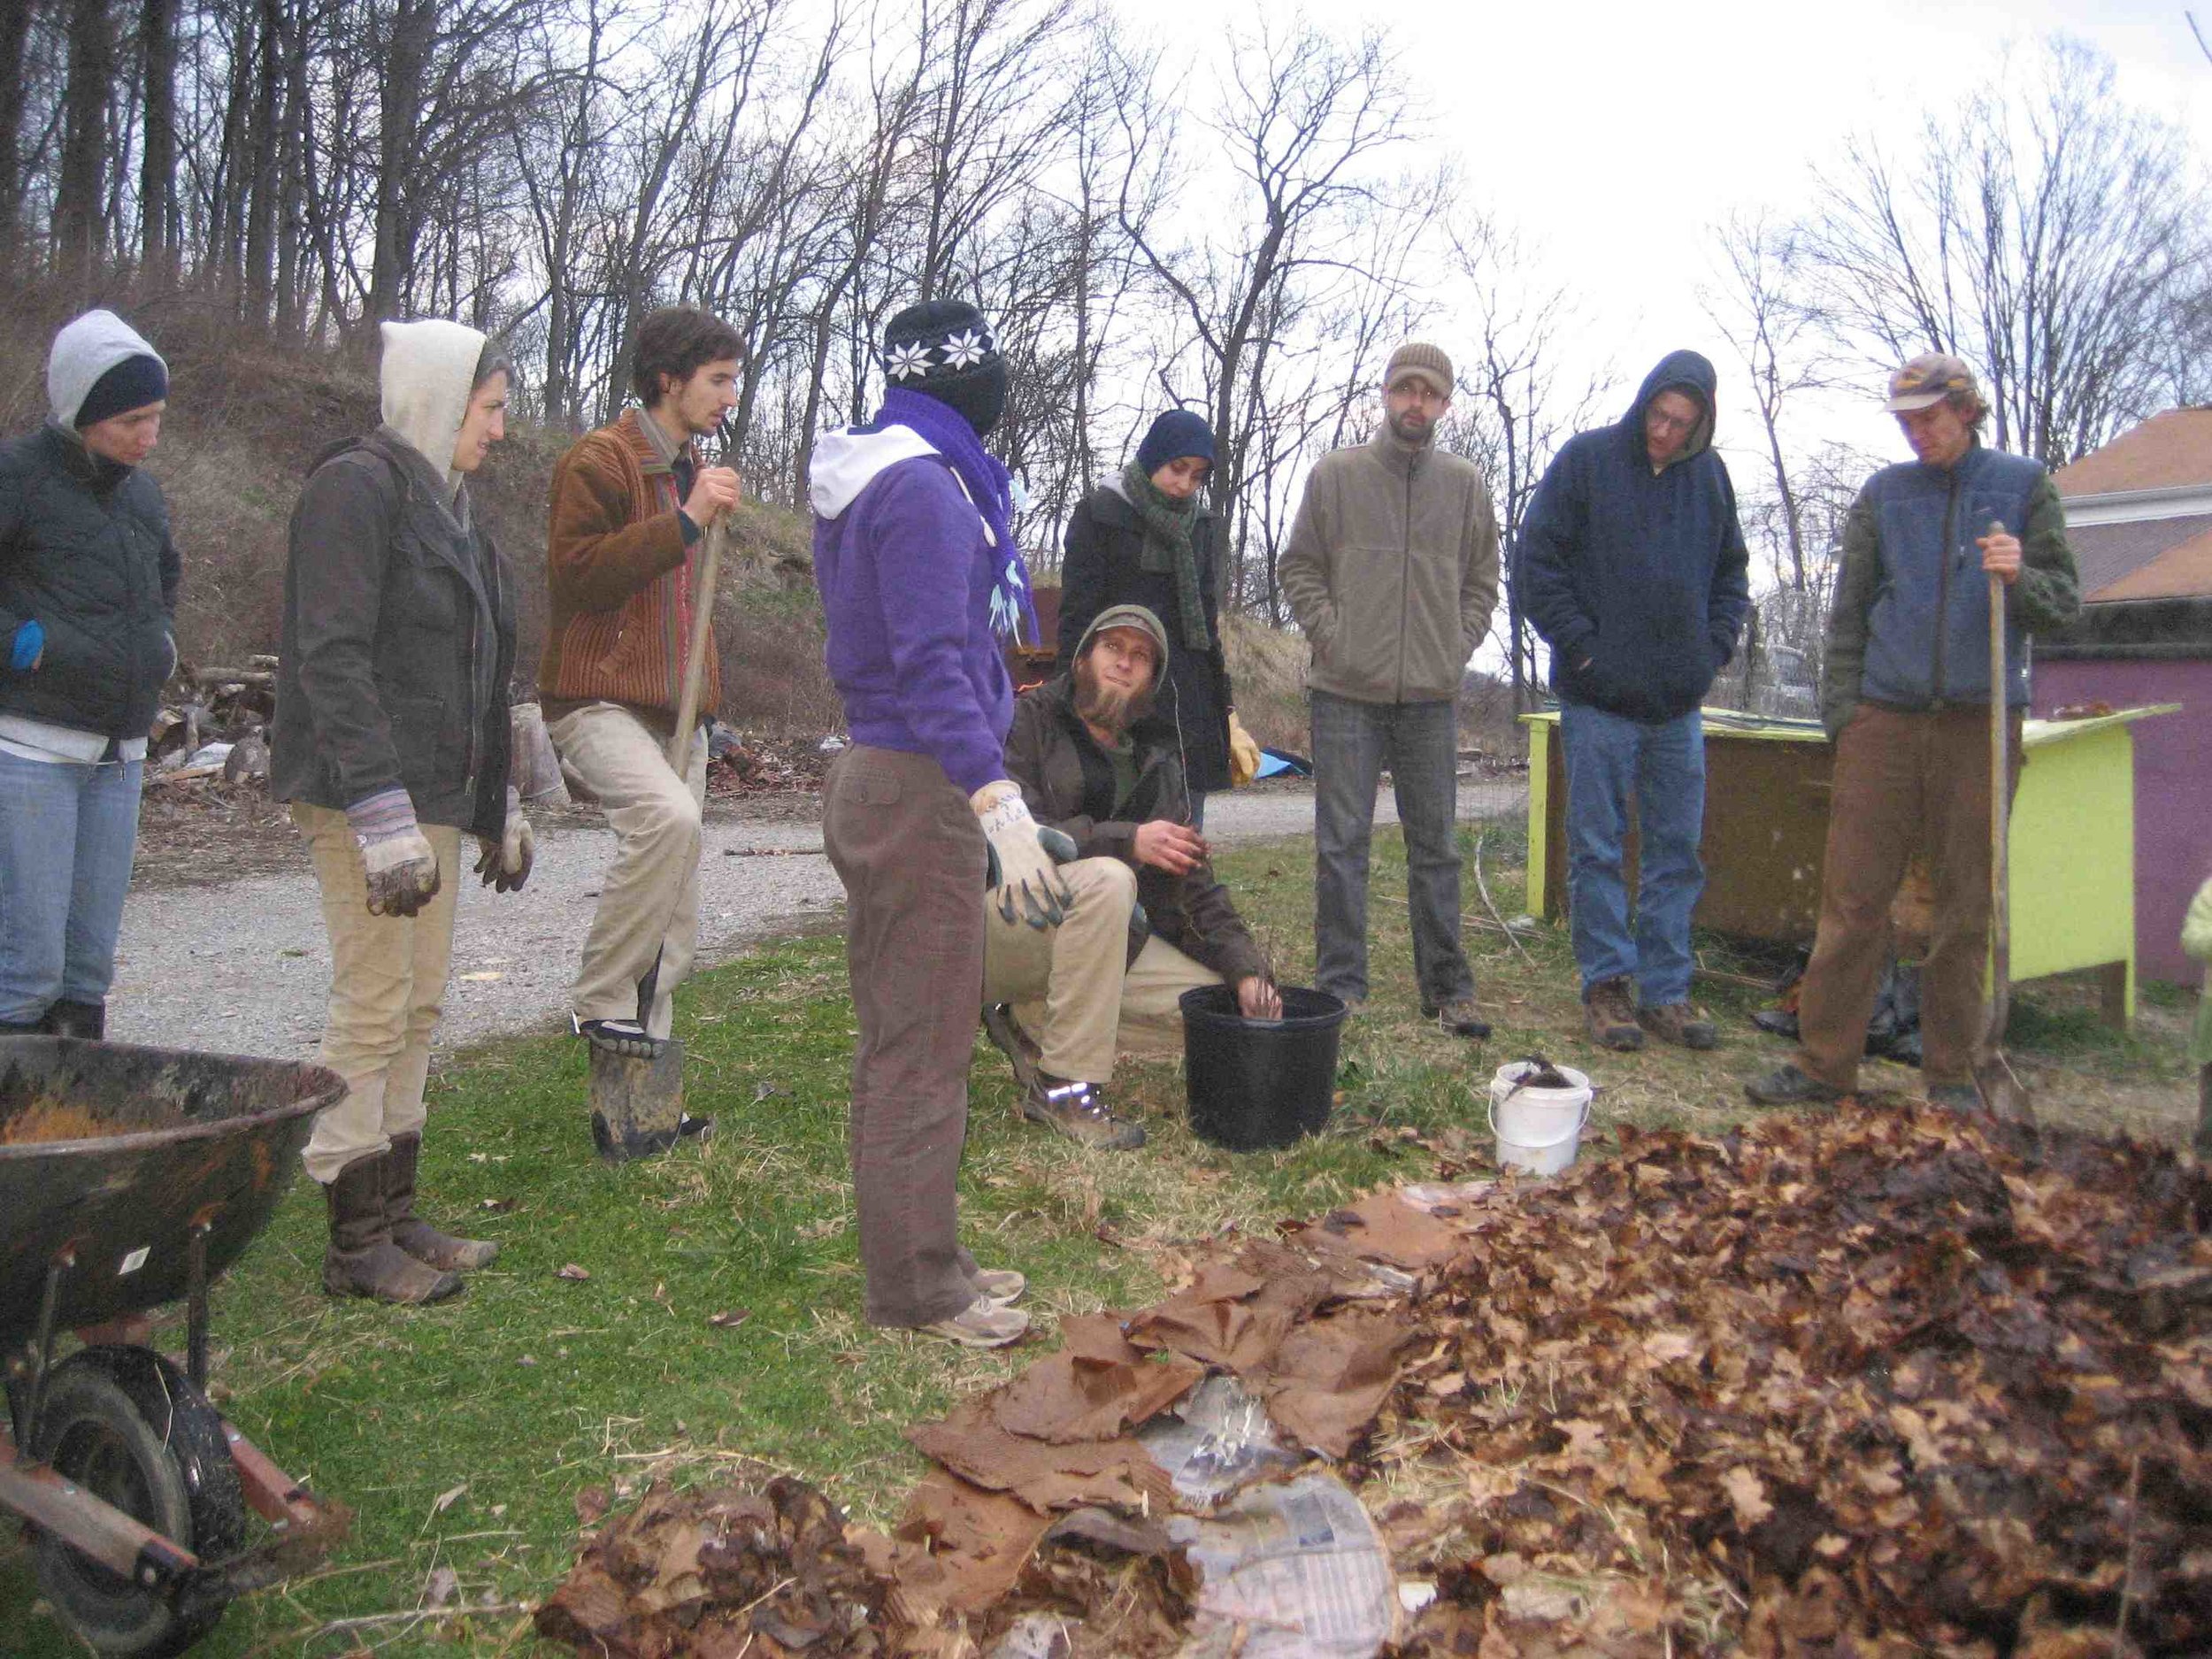 Ande Schewe teaching Food Forests through Hands on Learning